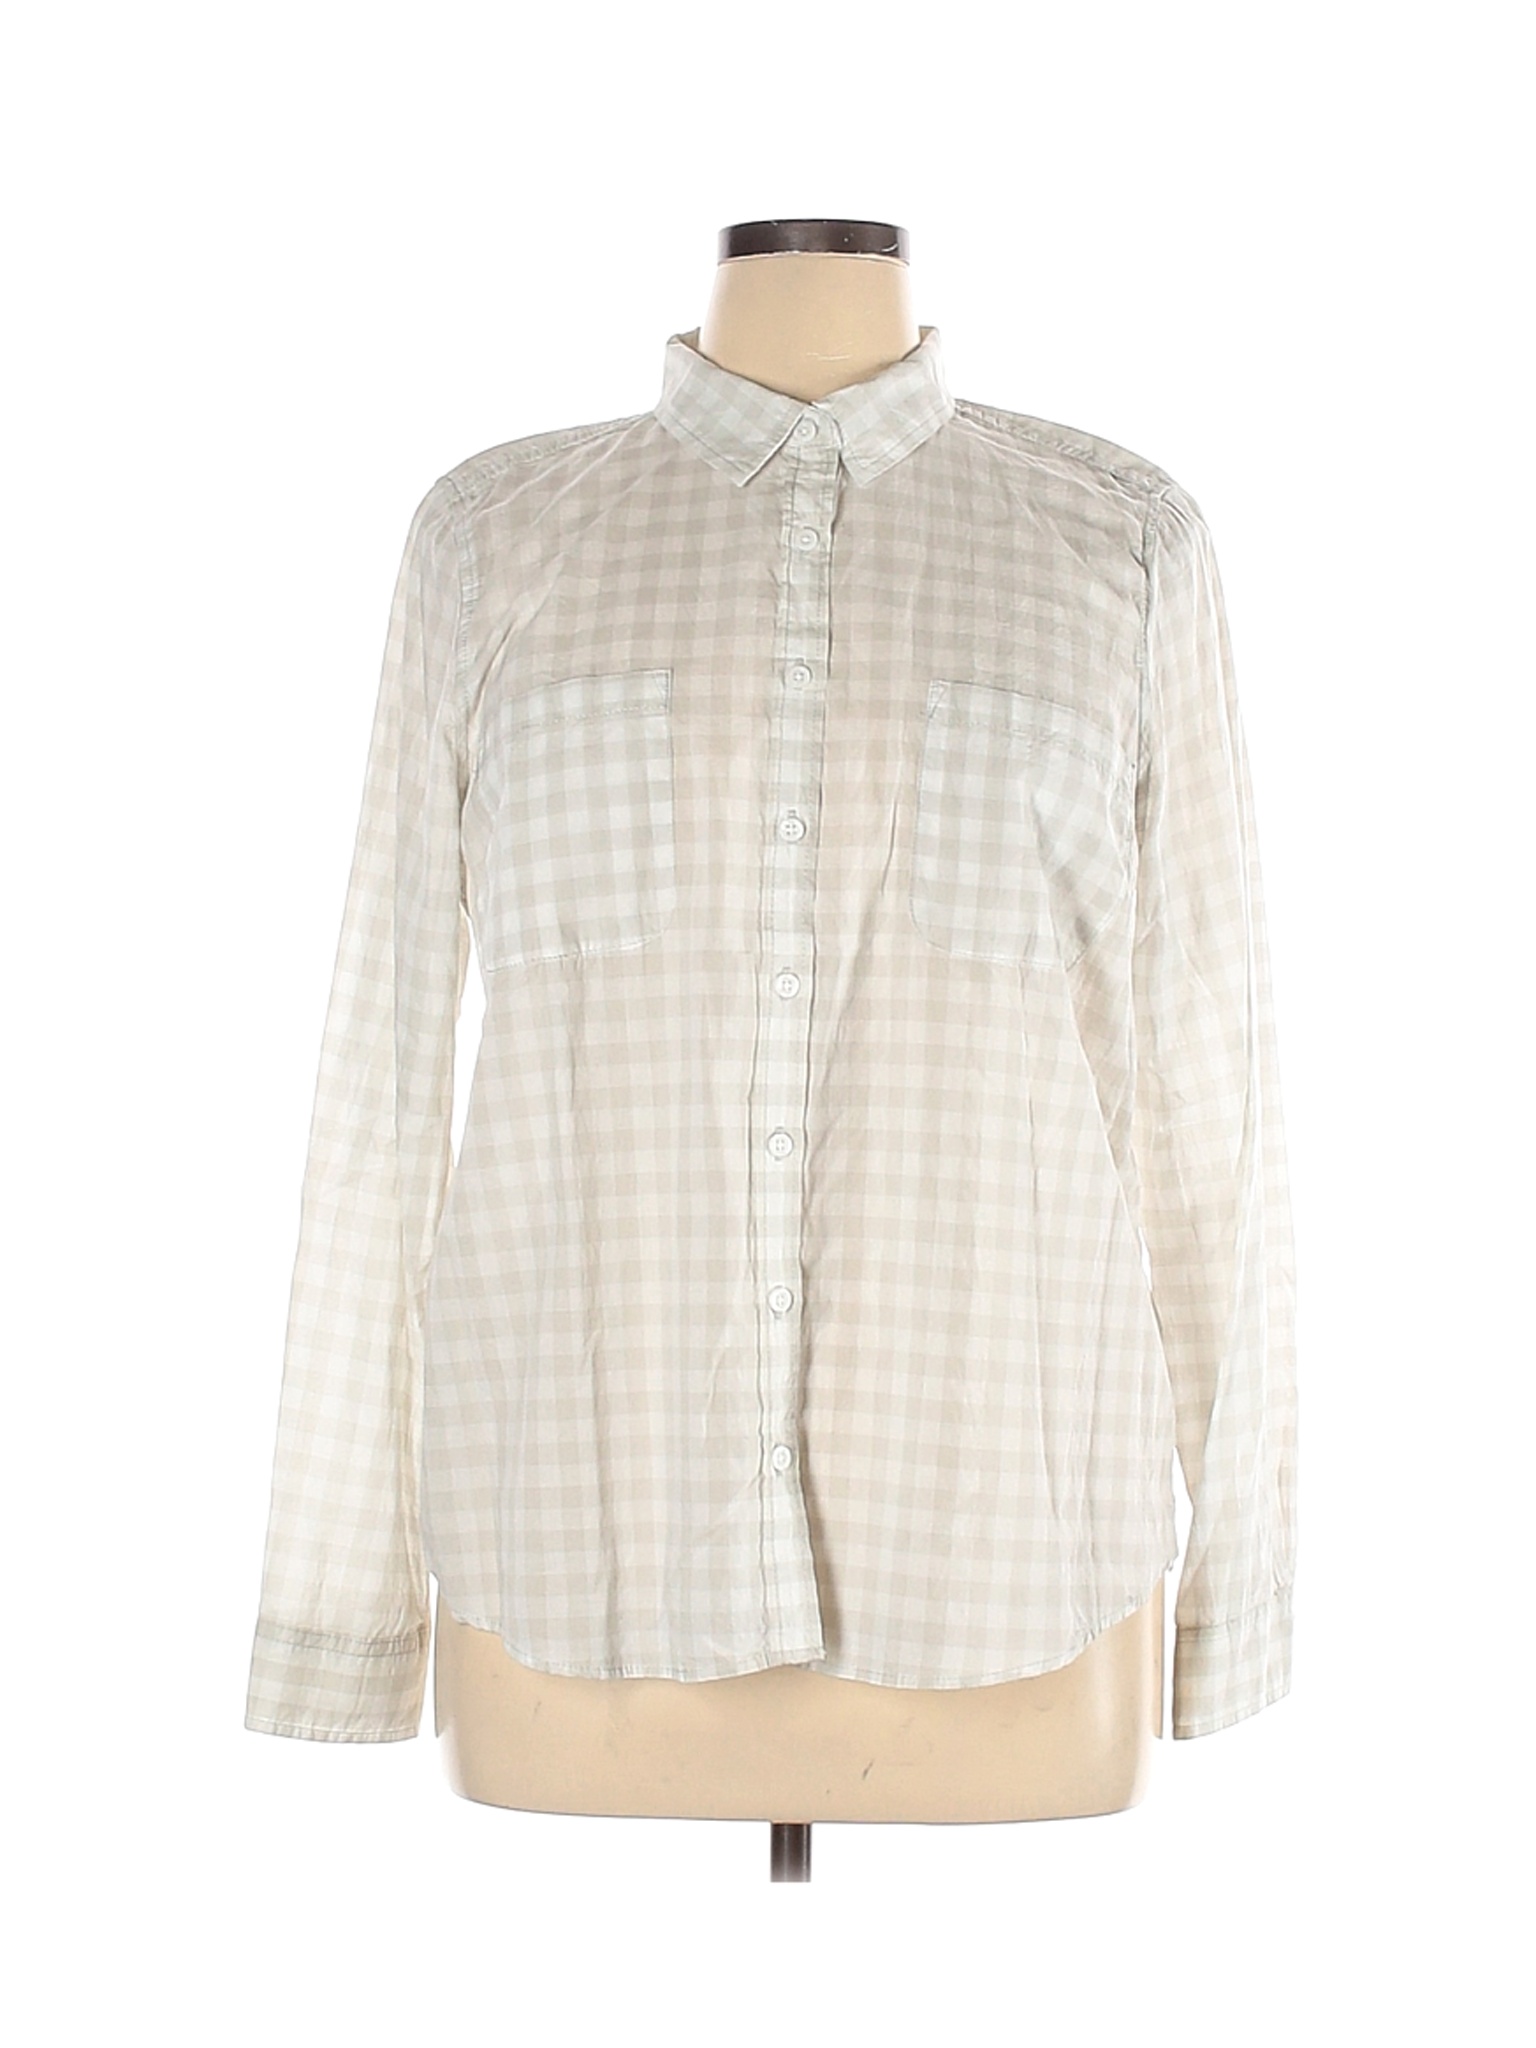 Sonoma Goods for Life Women Ivory Long Sleeve Button-Down Shirt XL | eBay